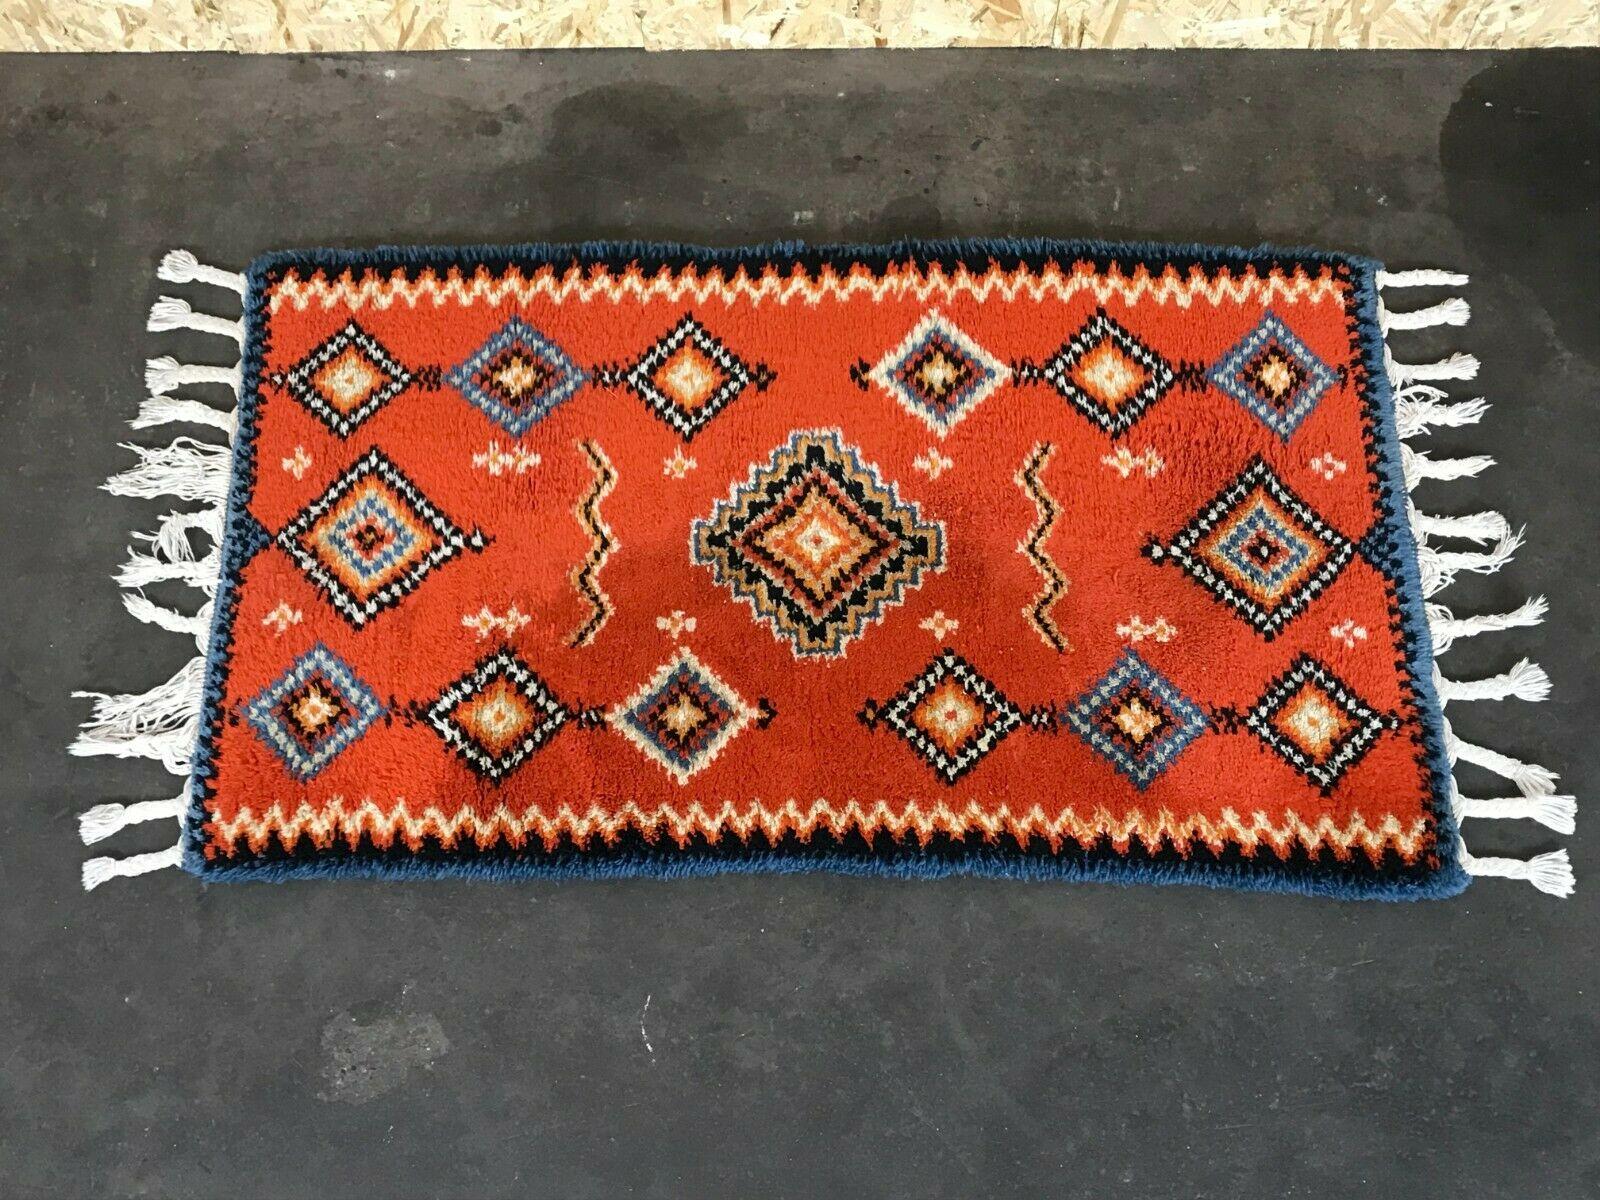 60s 70s Runner Rug Carpet rug Space Age Flower Power Design 60s 70s

Object: carpet

Manufacturer:

Condition: good

Age: around 1960-1970

Dimensions:

180cm x 95cm

Other notes:

The pictures serve as part of the